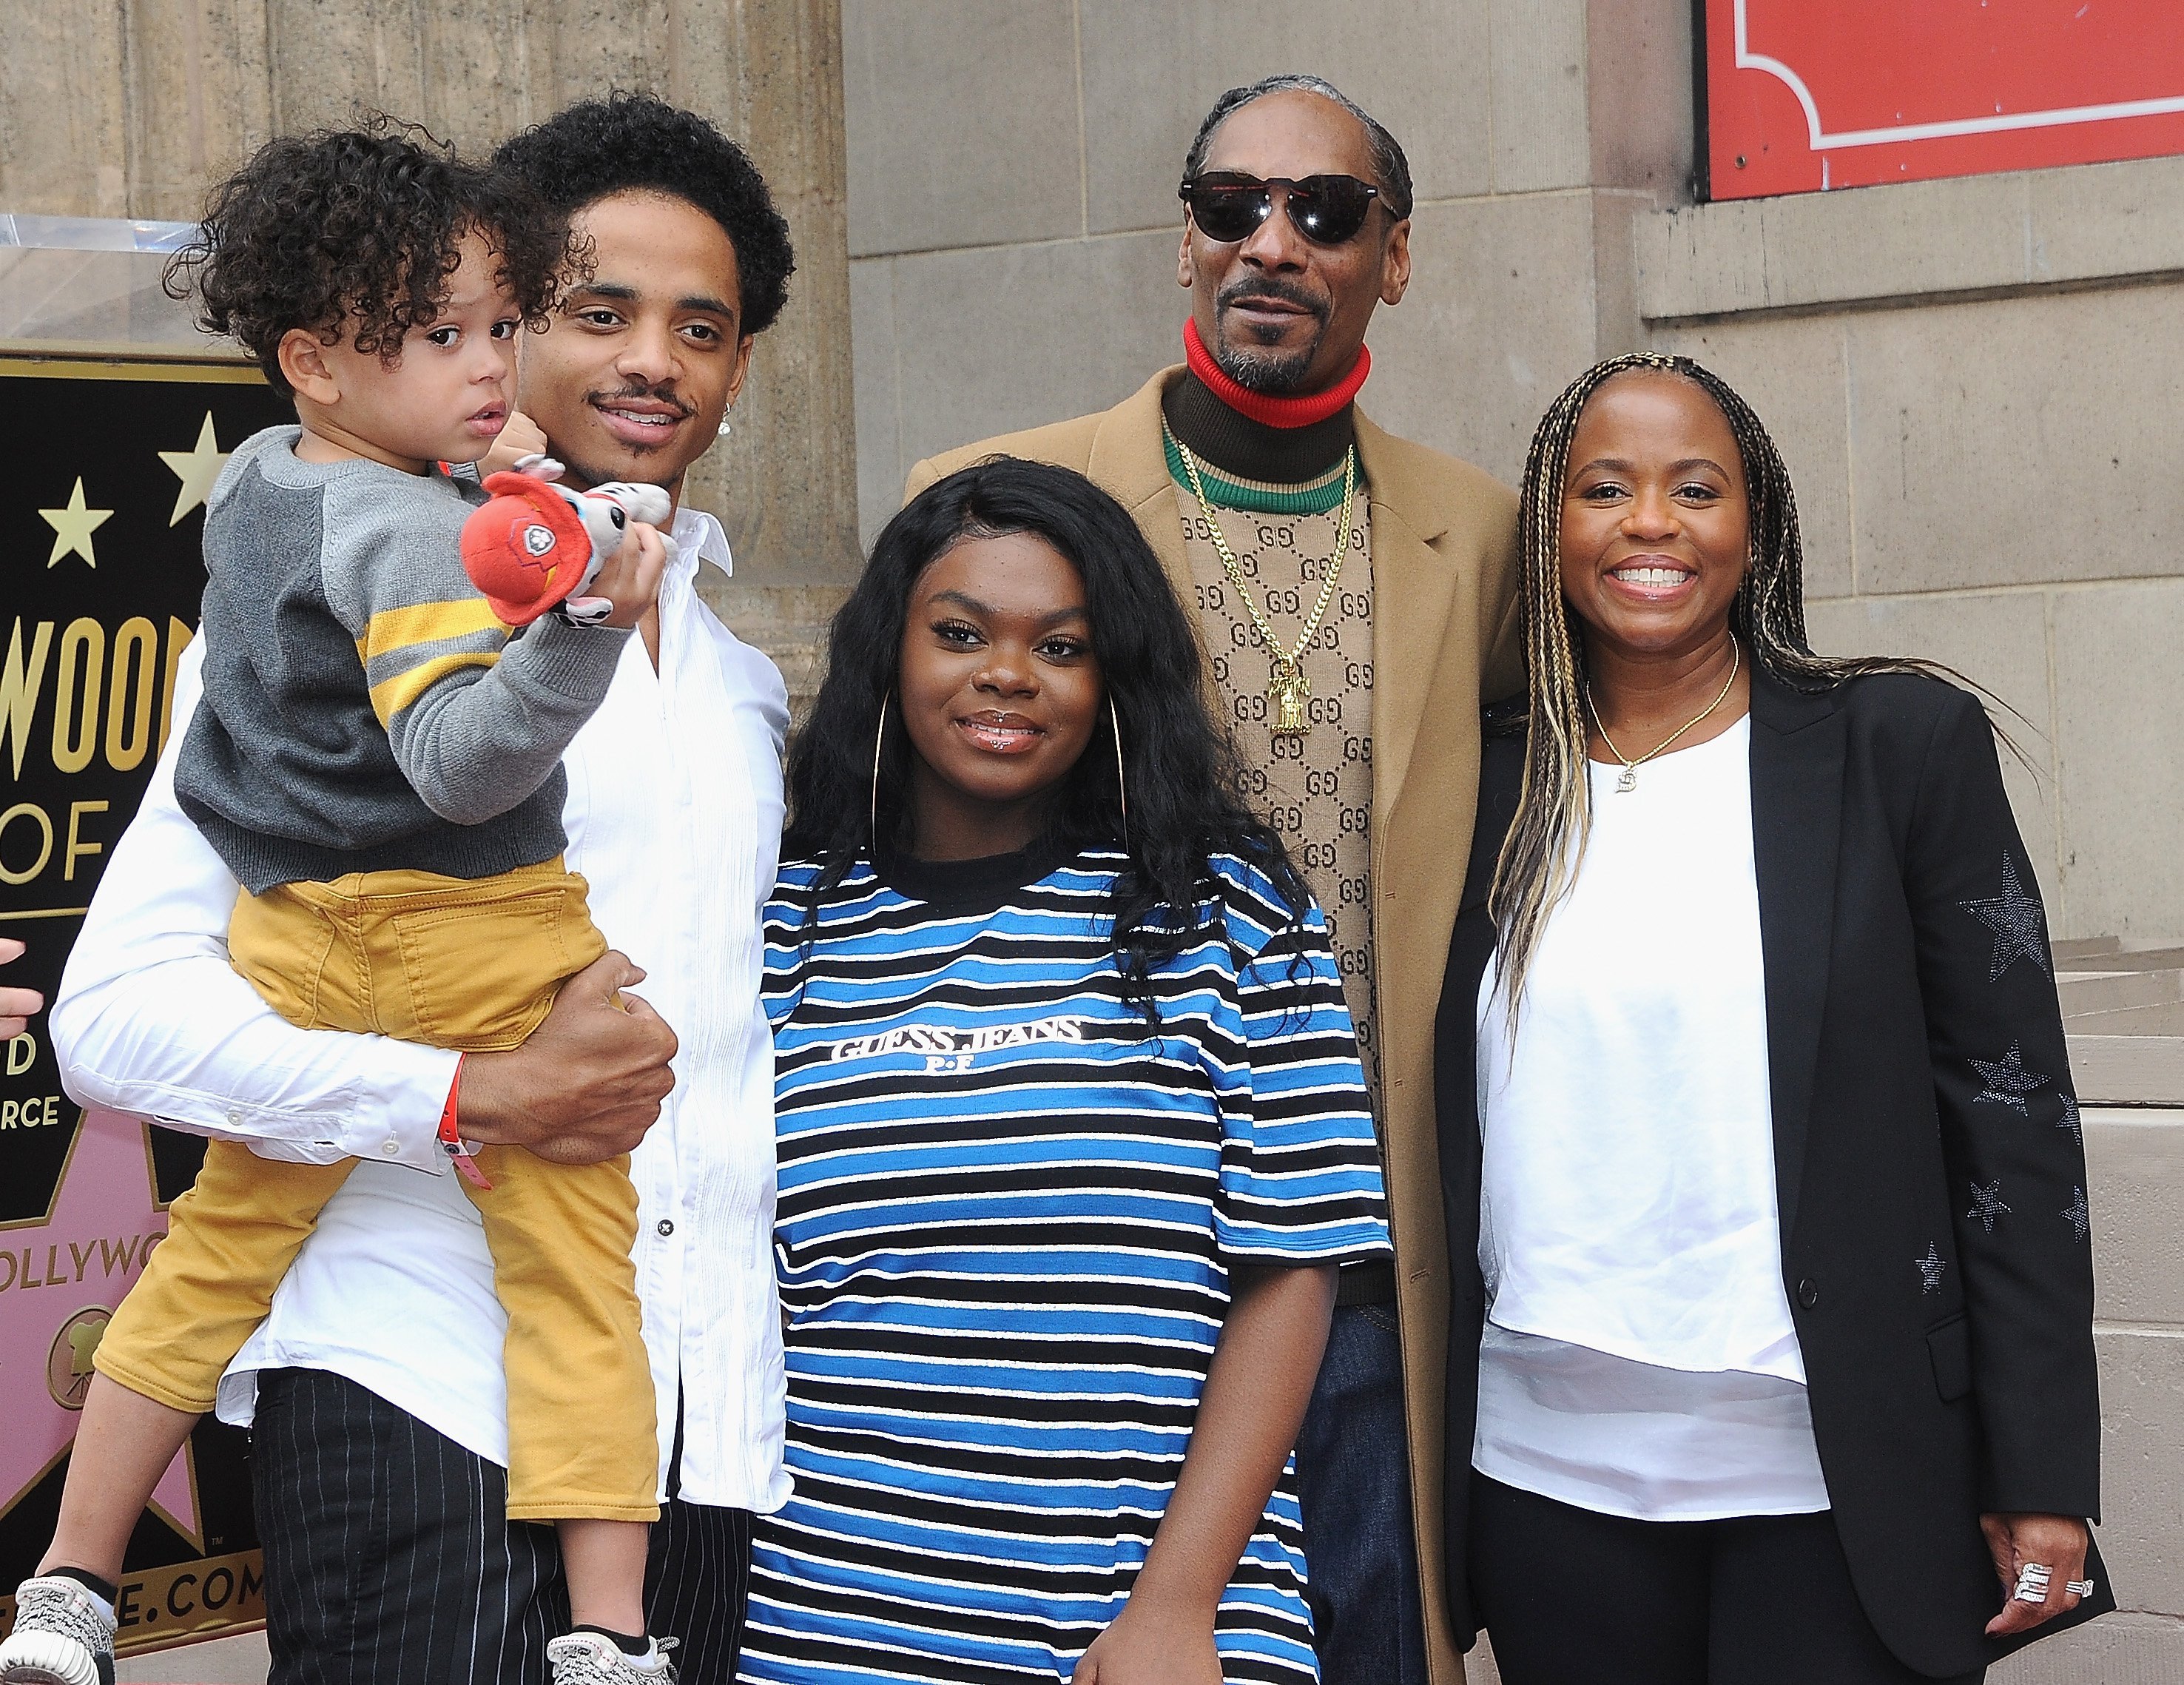 Snoop Dogg and Shante Taylor with family attends Snoop Dogg's star ceremony on The Hollywood Walk of Fame held on November 19, 2018. | Source: Getty Images